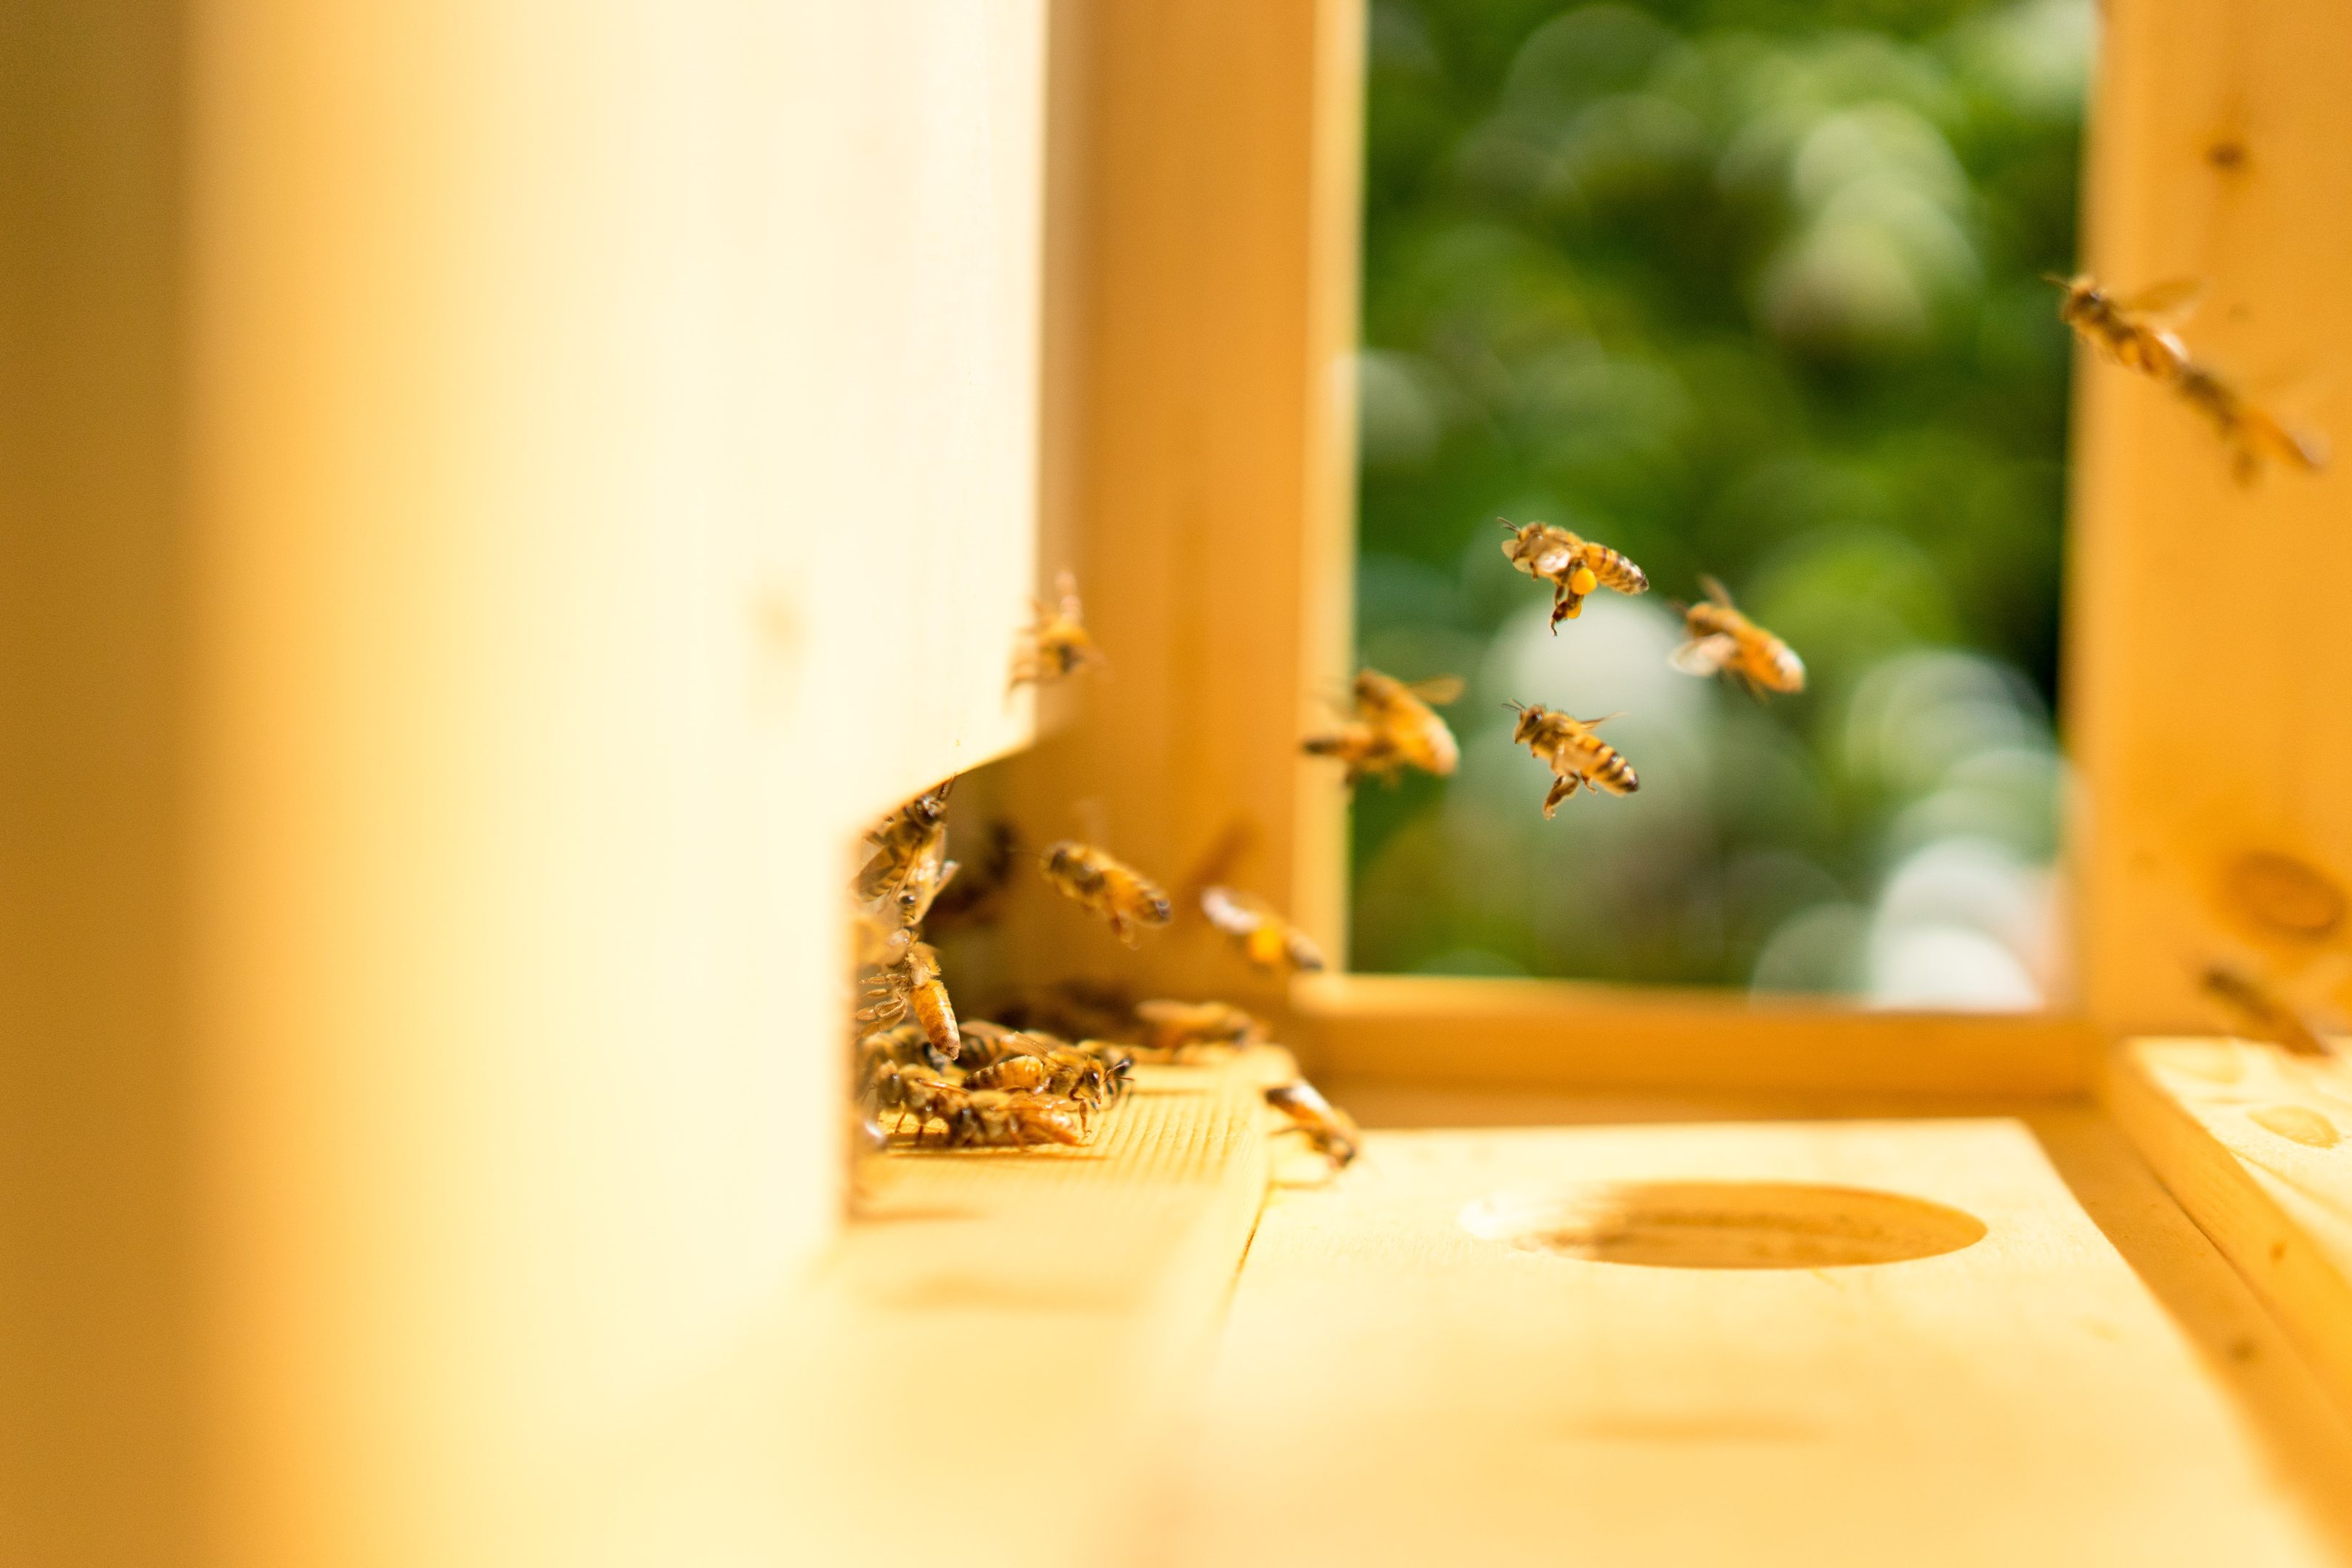 Bees fanning their wings at the front entrance of the hive